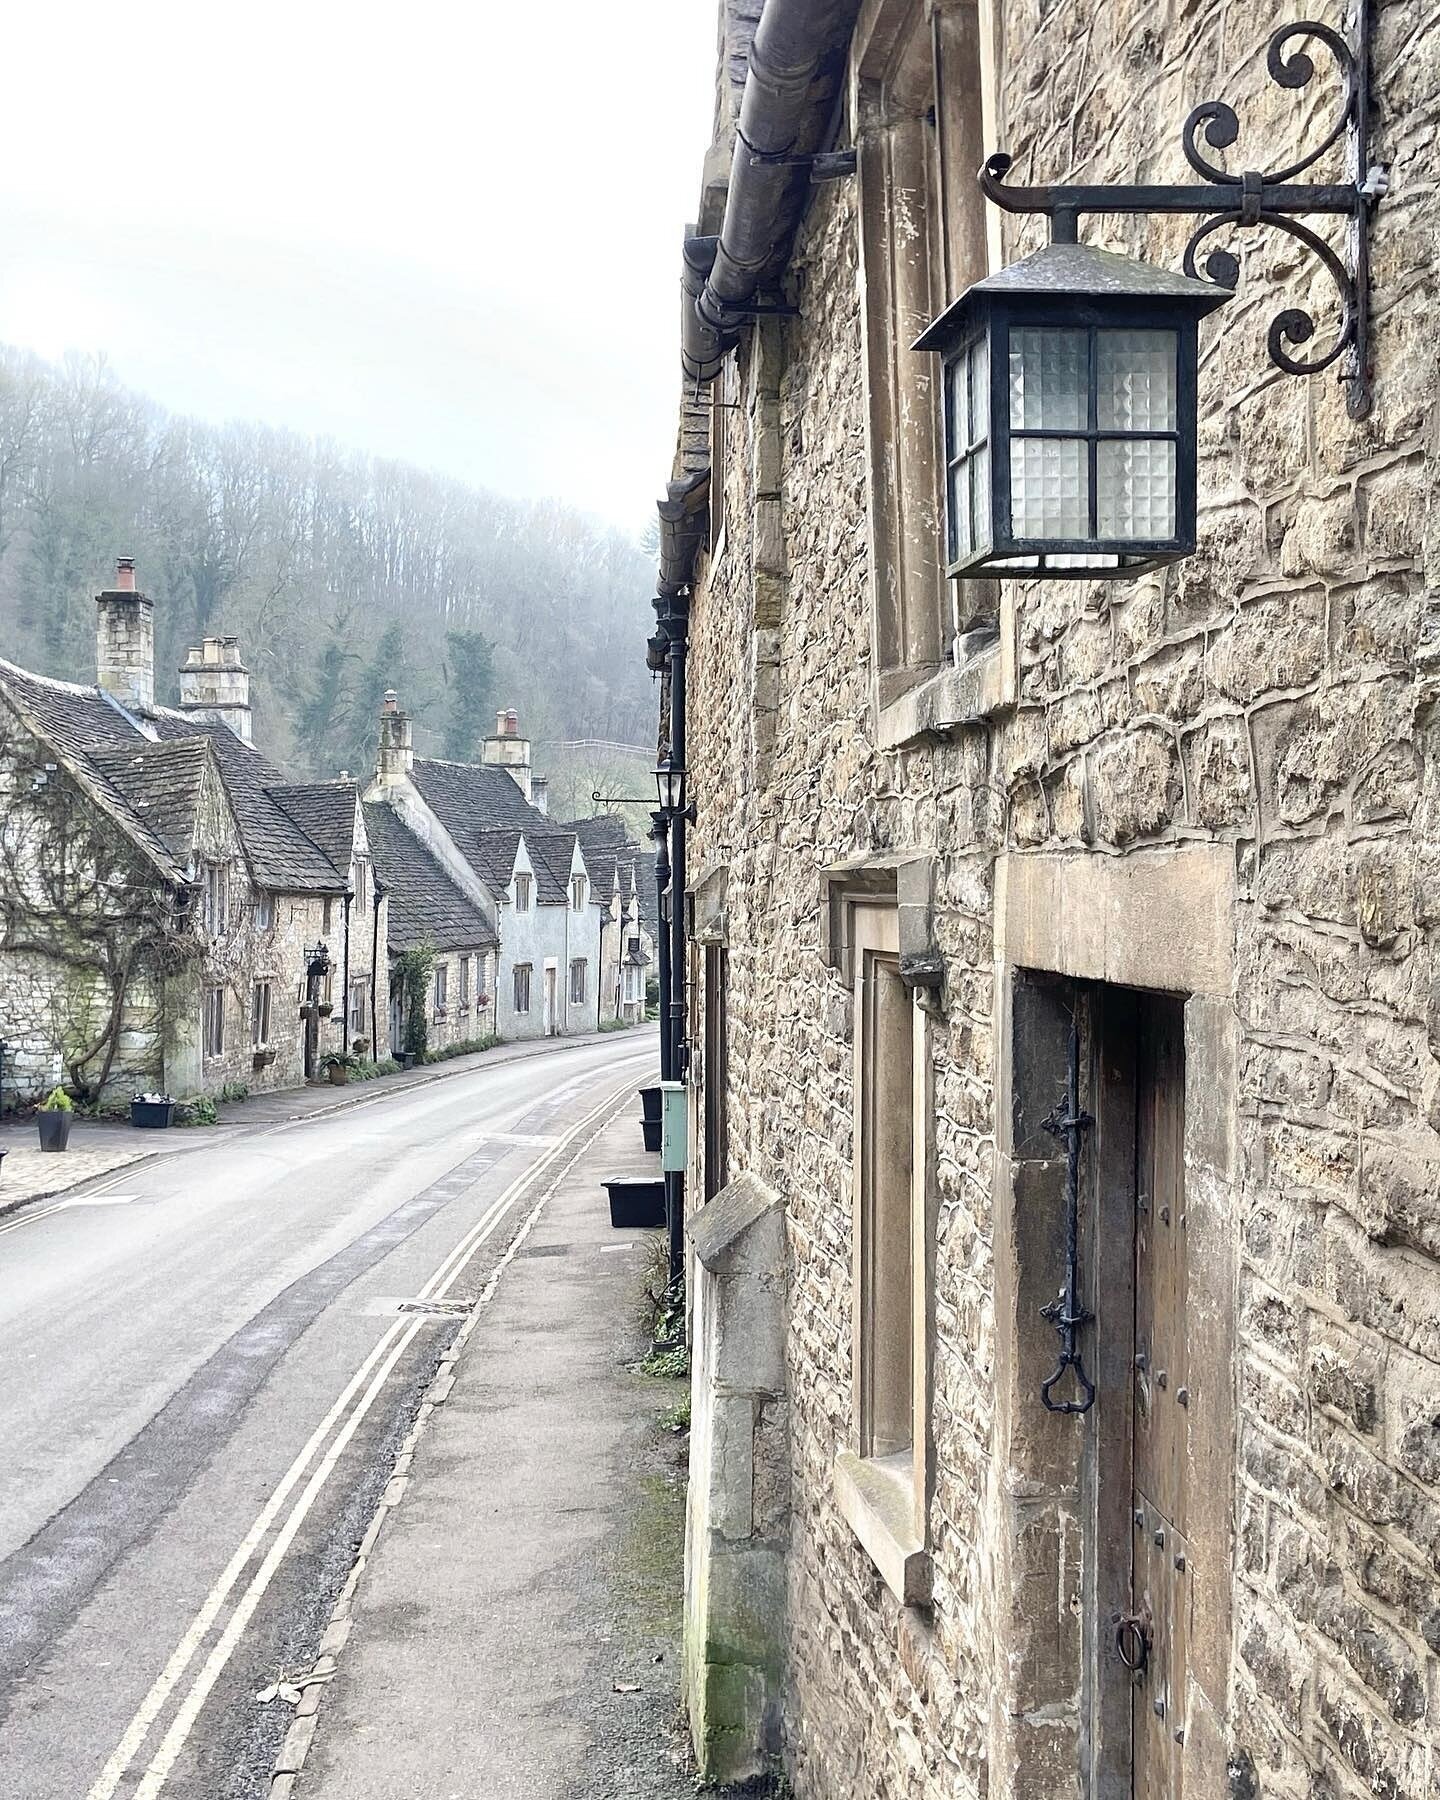 Surrounded by Cotswolds National Landscape, Castle Combe offers plenty of picturesque walks and quaint villages streets waiting to be explored.

Castle Combe has featured regularly as a film location, most recently in The Wolf Man, Stardust and Steph